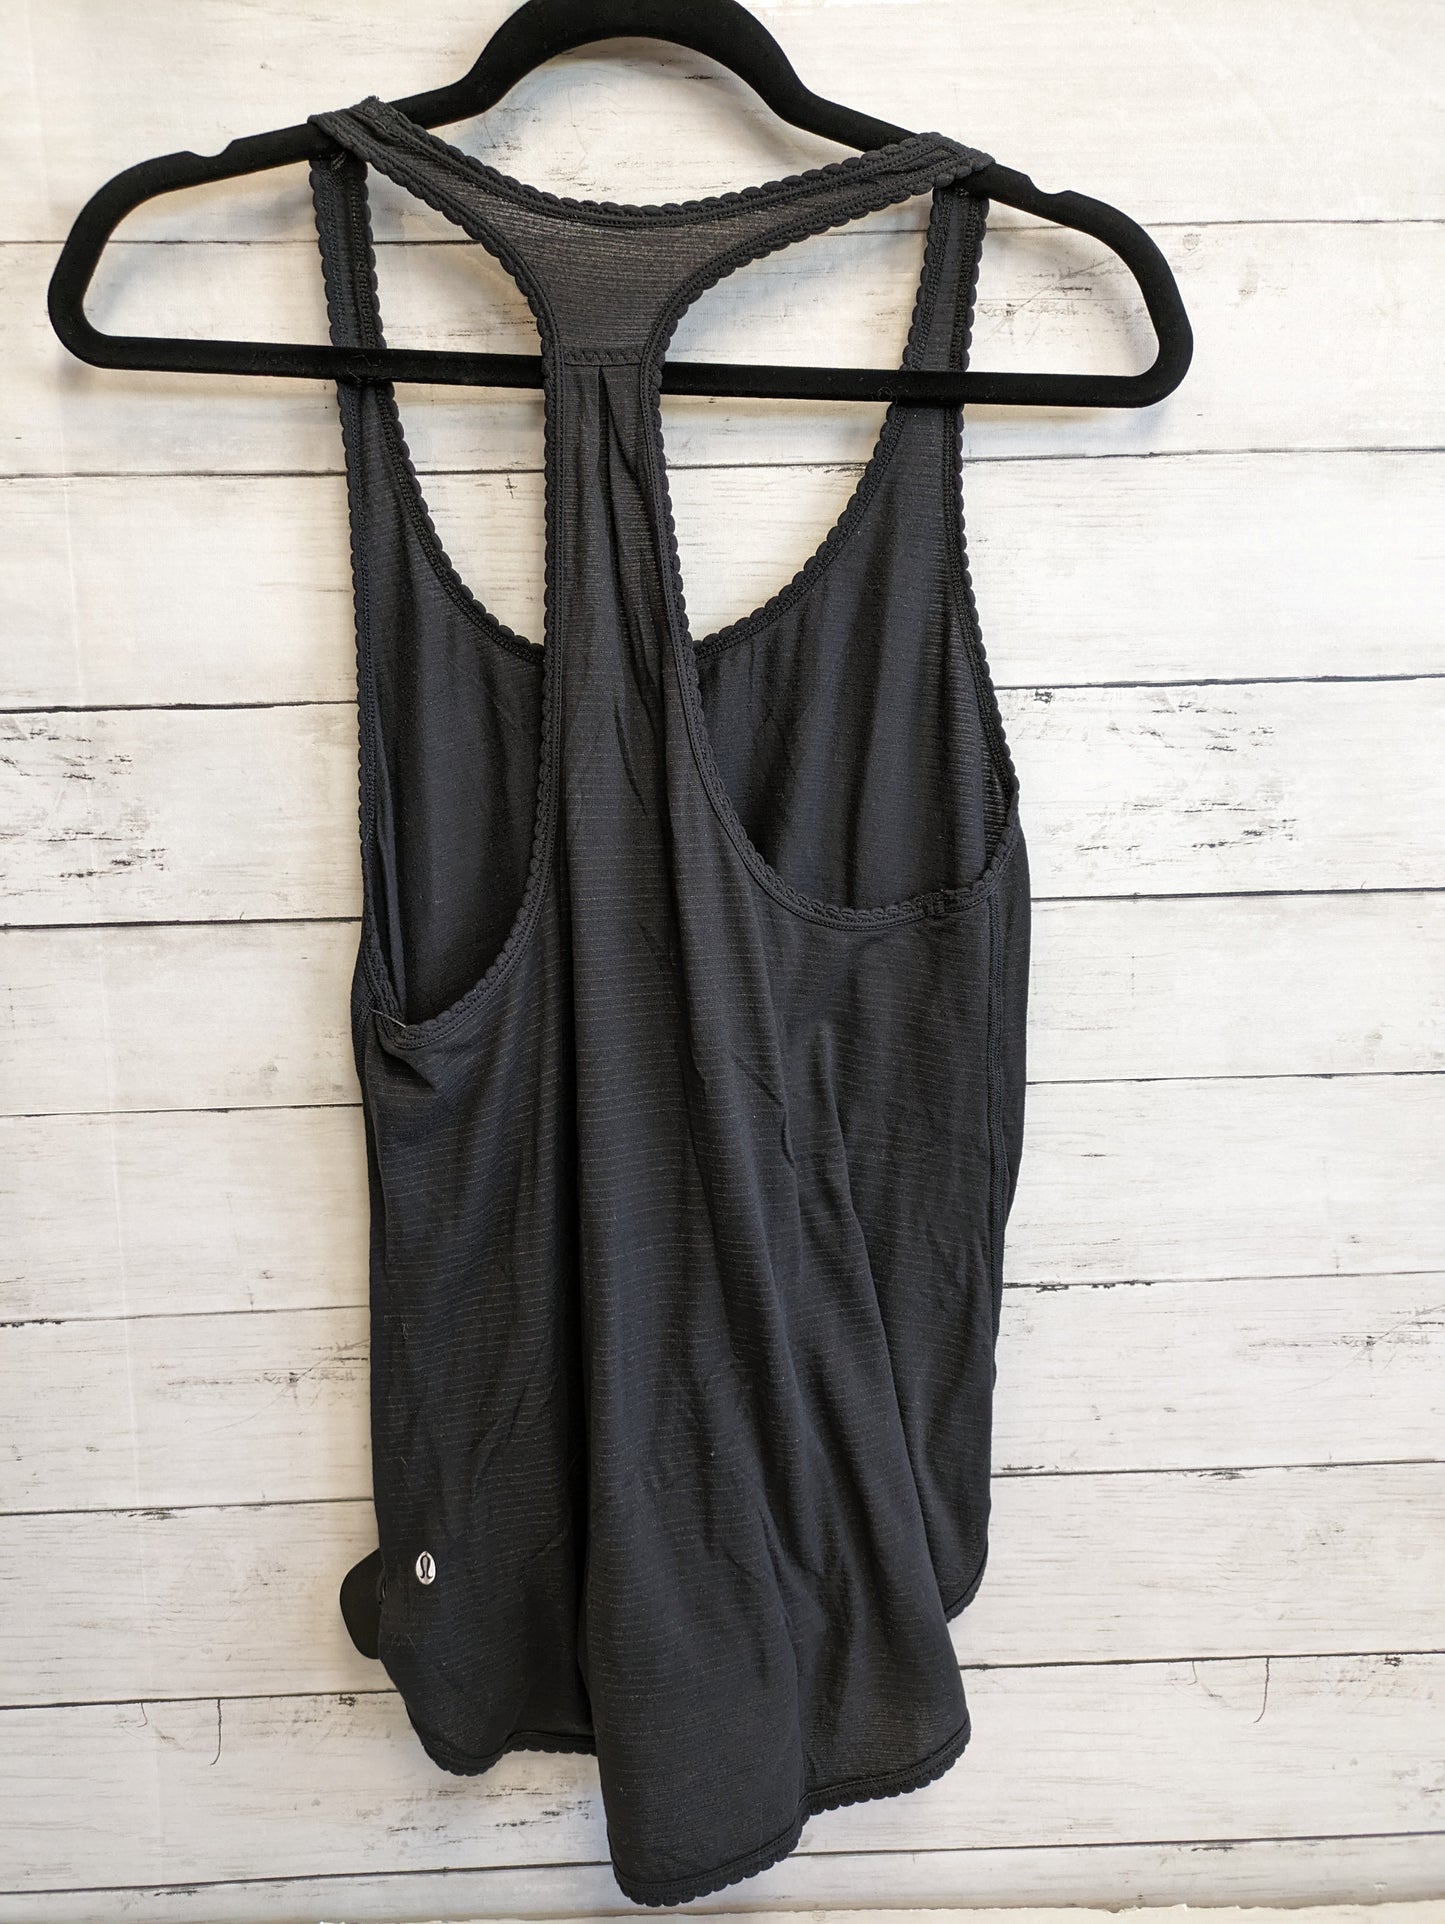 Athletic Tank Top By Lululemon  Size: Xs